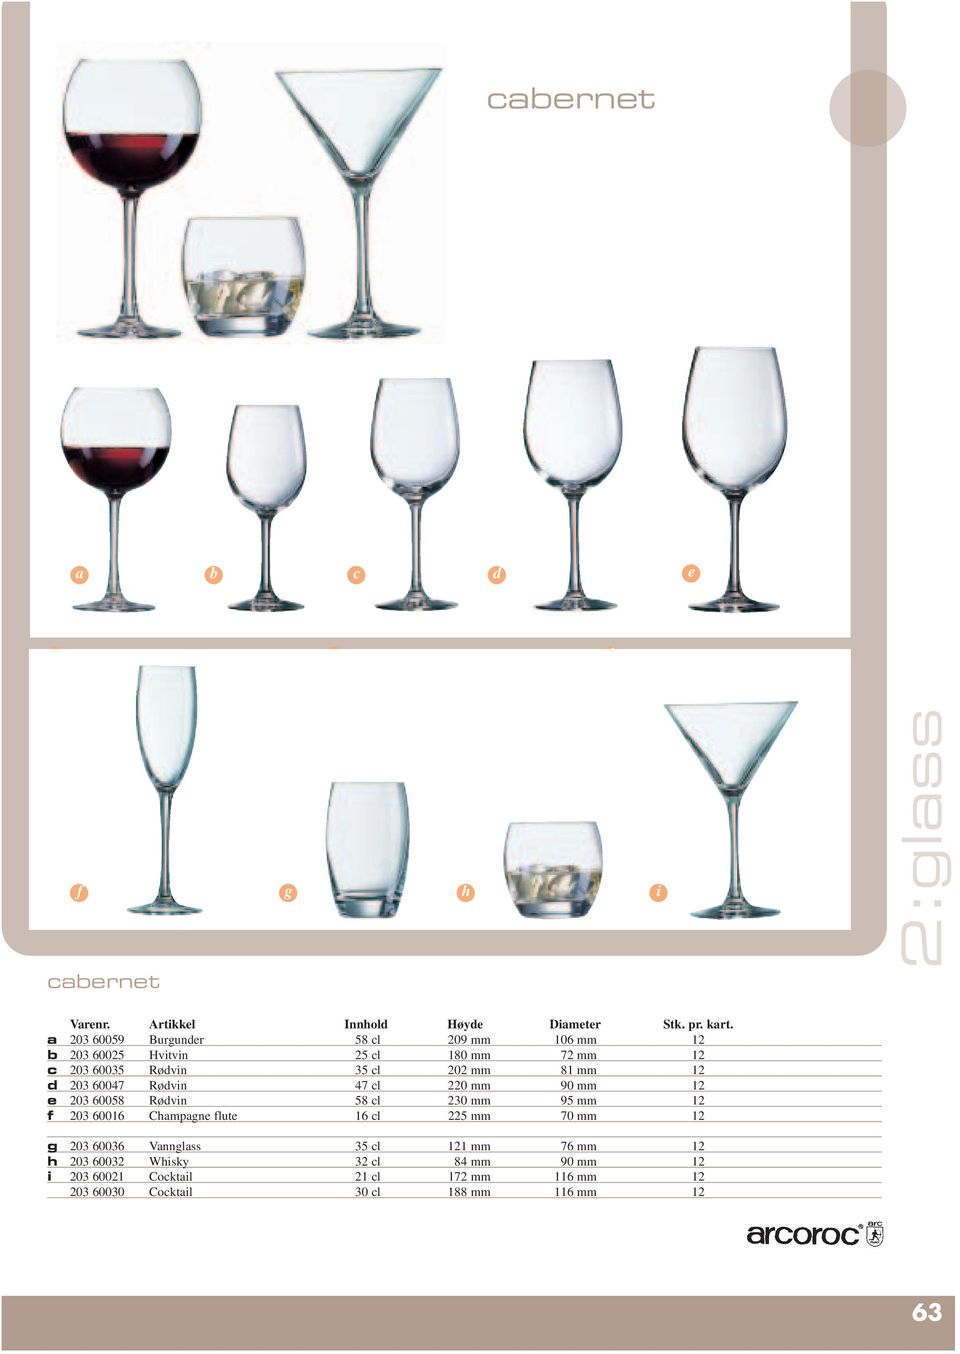 cl 230 mm 95 mm 12 f 203 60016 Champagne flute 16 cl 225 mm 70 mm 12 g 203 60036 Vannglass 35 cl 121 mm 76 mm 12 h 203